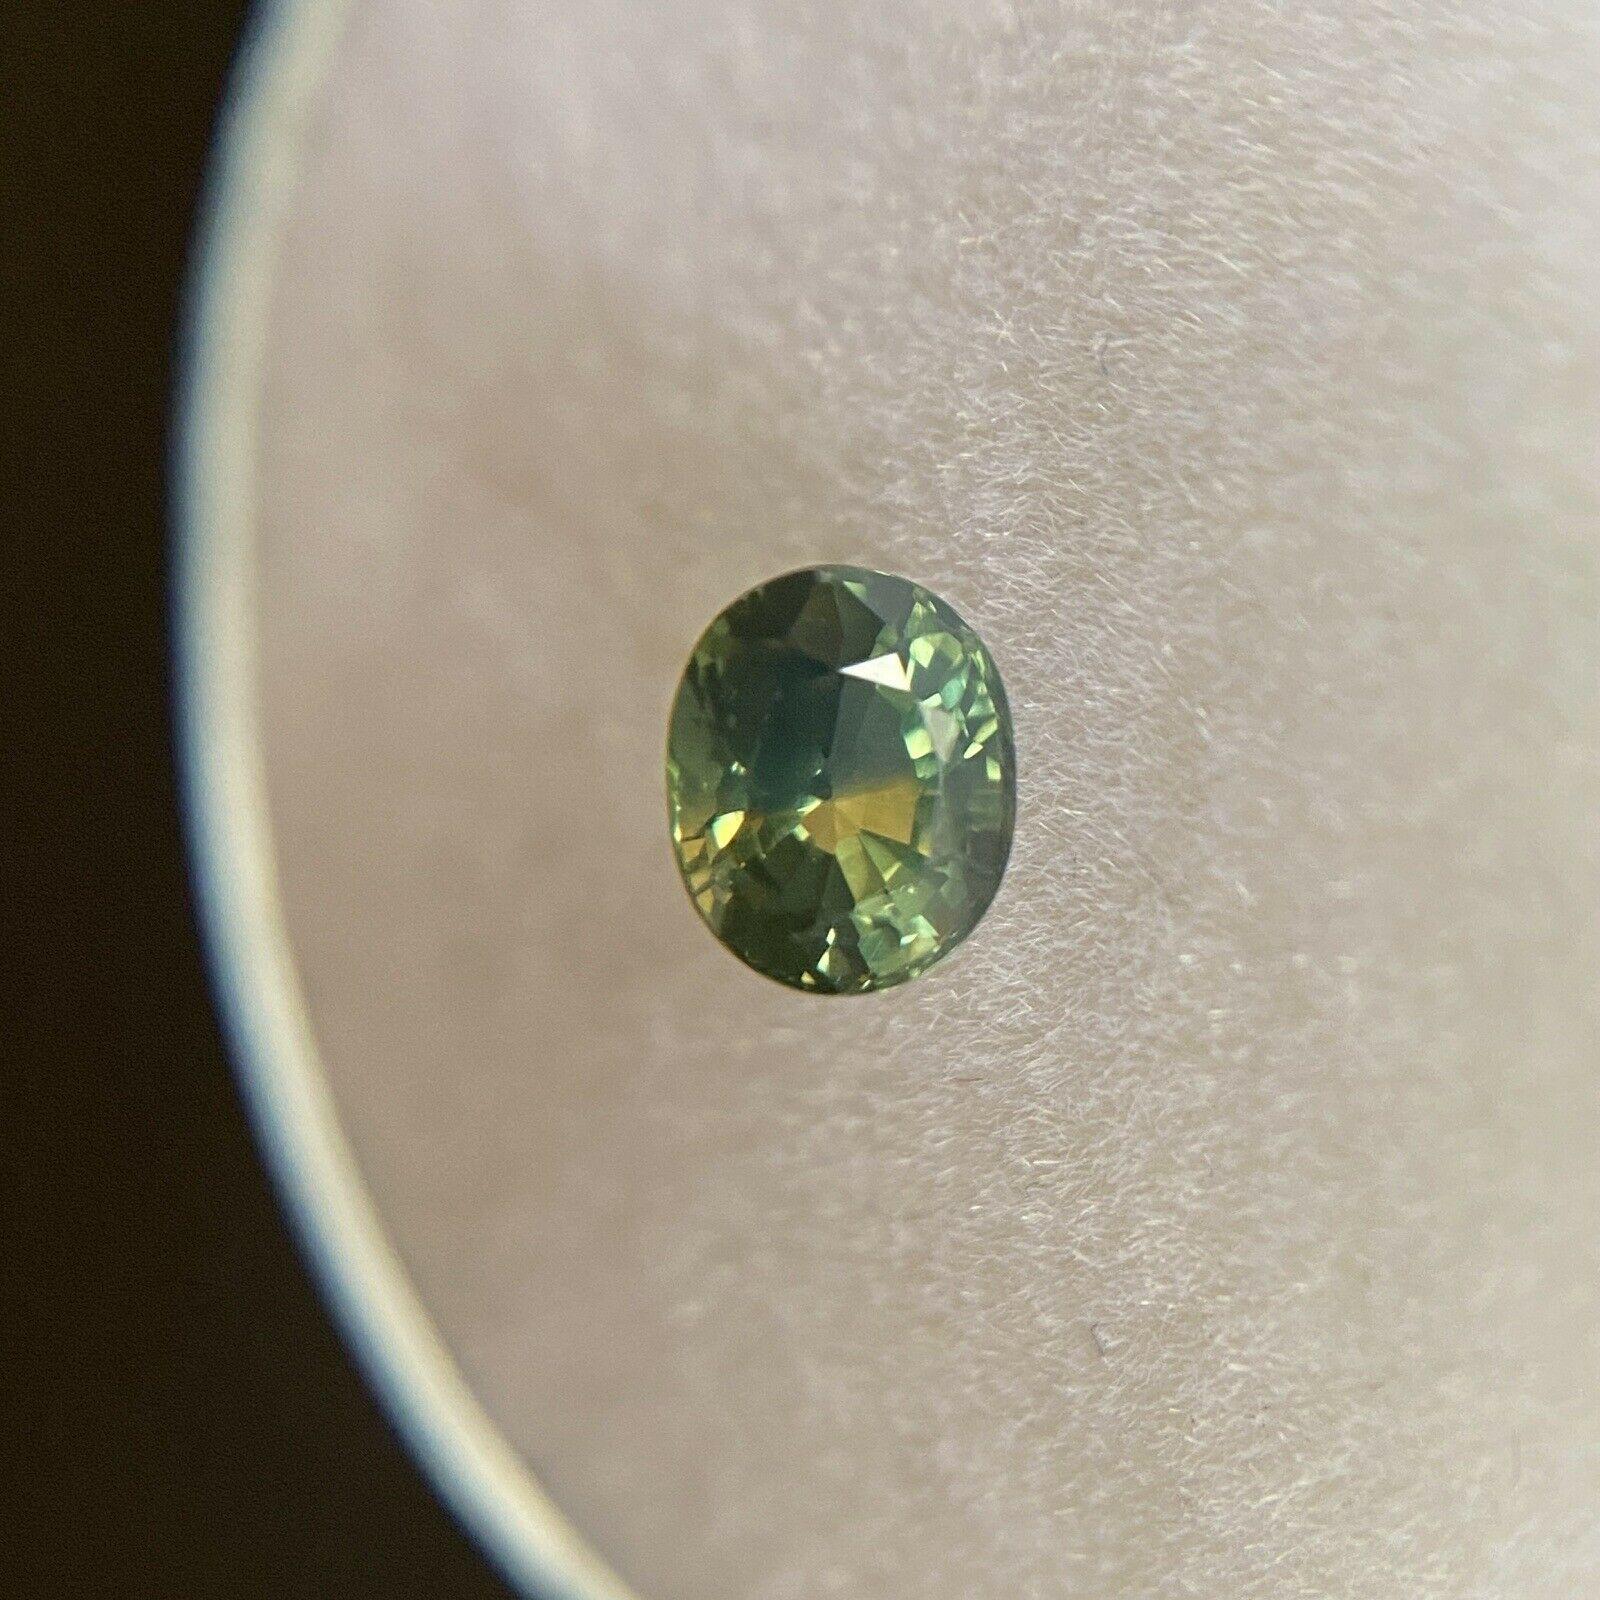 Untreated Parti Colour Australia Sapphire 0.50ct Blue Green Yellow Oval 4.8x4mm

Natural Untreated Greenish Yellow Blue Parti-Colour/Bi colour Australian Sapphire Gemstone. 
0.48 Carat with a beautiful and unique greenish yellow blue colour and